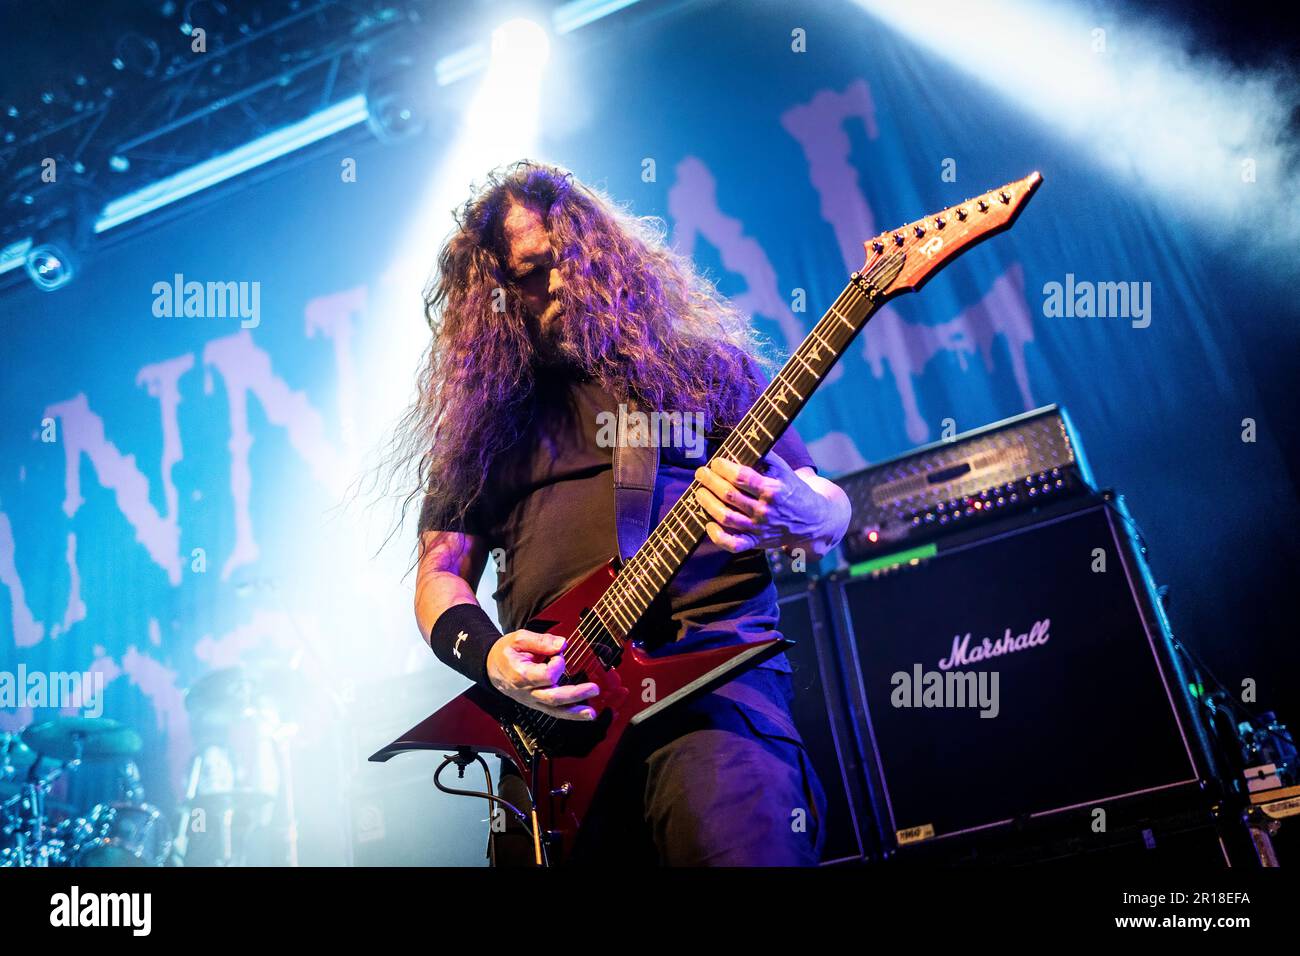 Oslo, Norway. 06th, April 2023. The American death metal band Cannibal Corpse performs a live concert at Rockefeller during the Norwegian metal festival Inferno Metal Festival 2023 in Oslo. (Photo credit: Gonzales Photo - Terje Dokken). Stock Photo